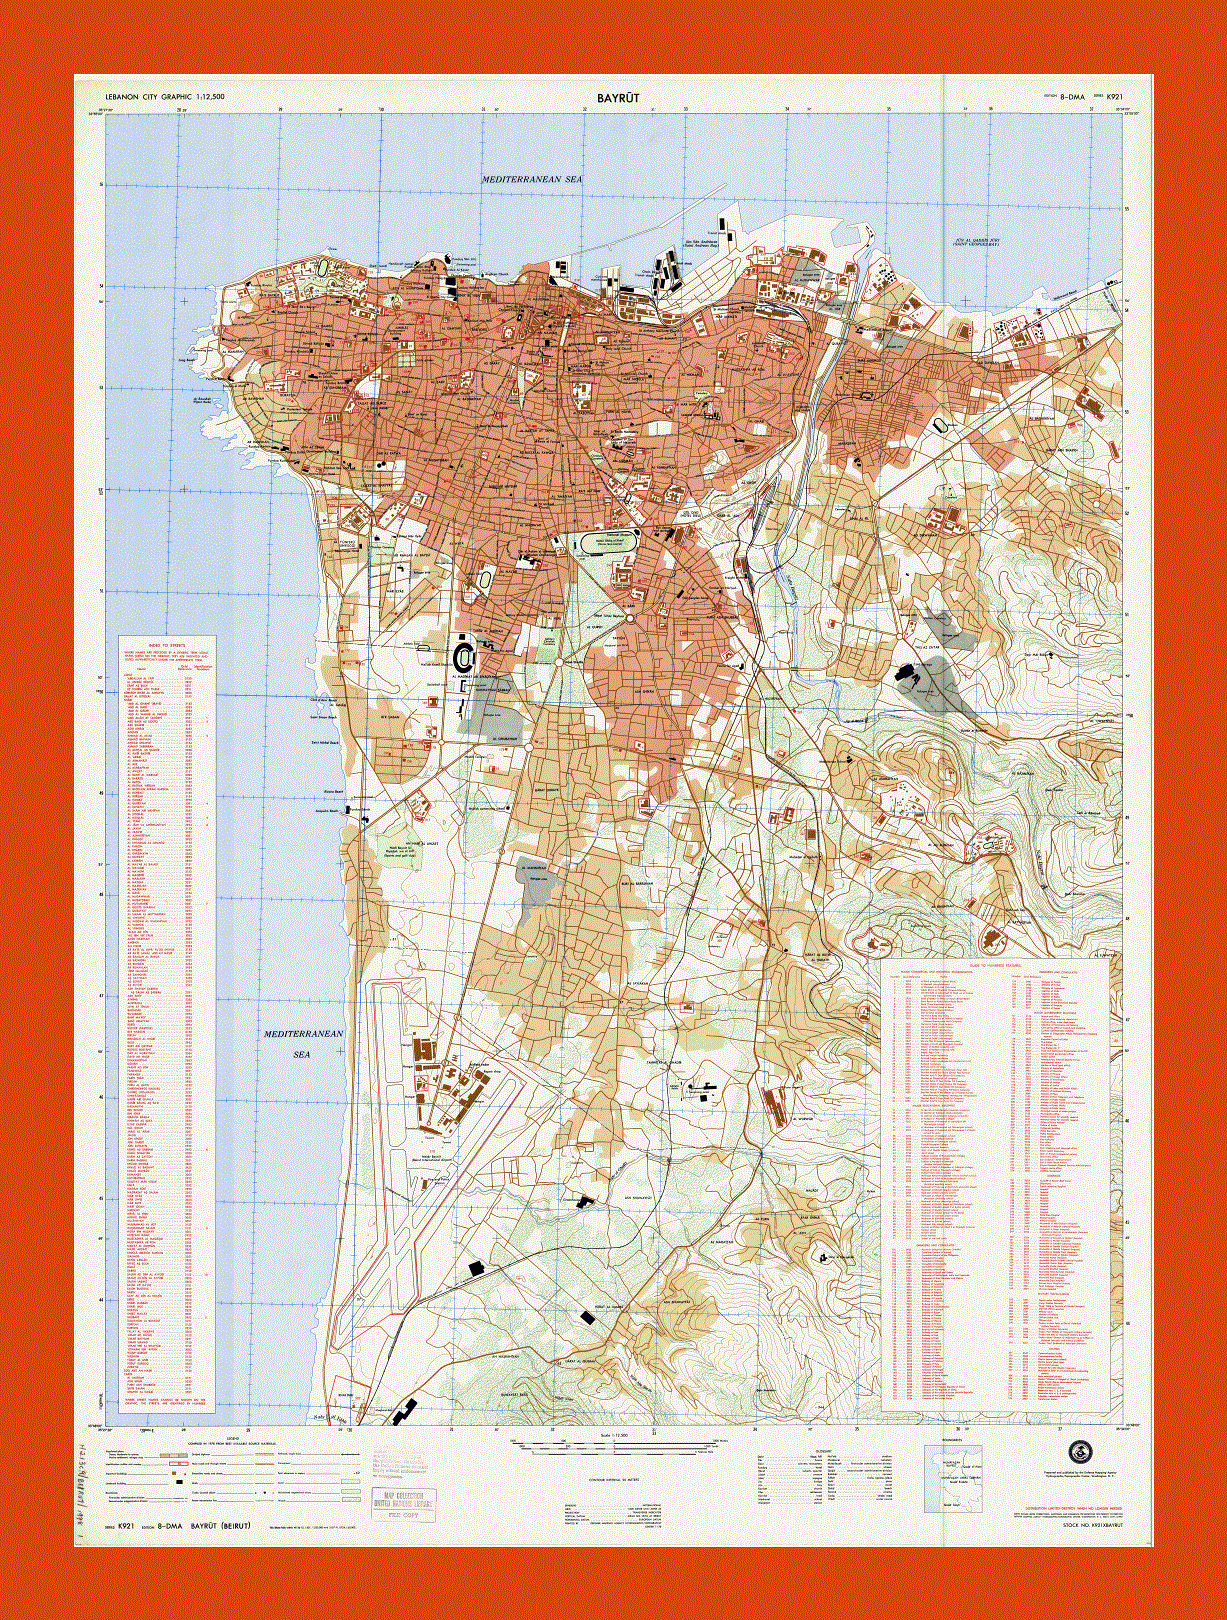 Road map of Beirut city - 1978